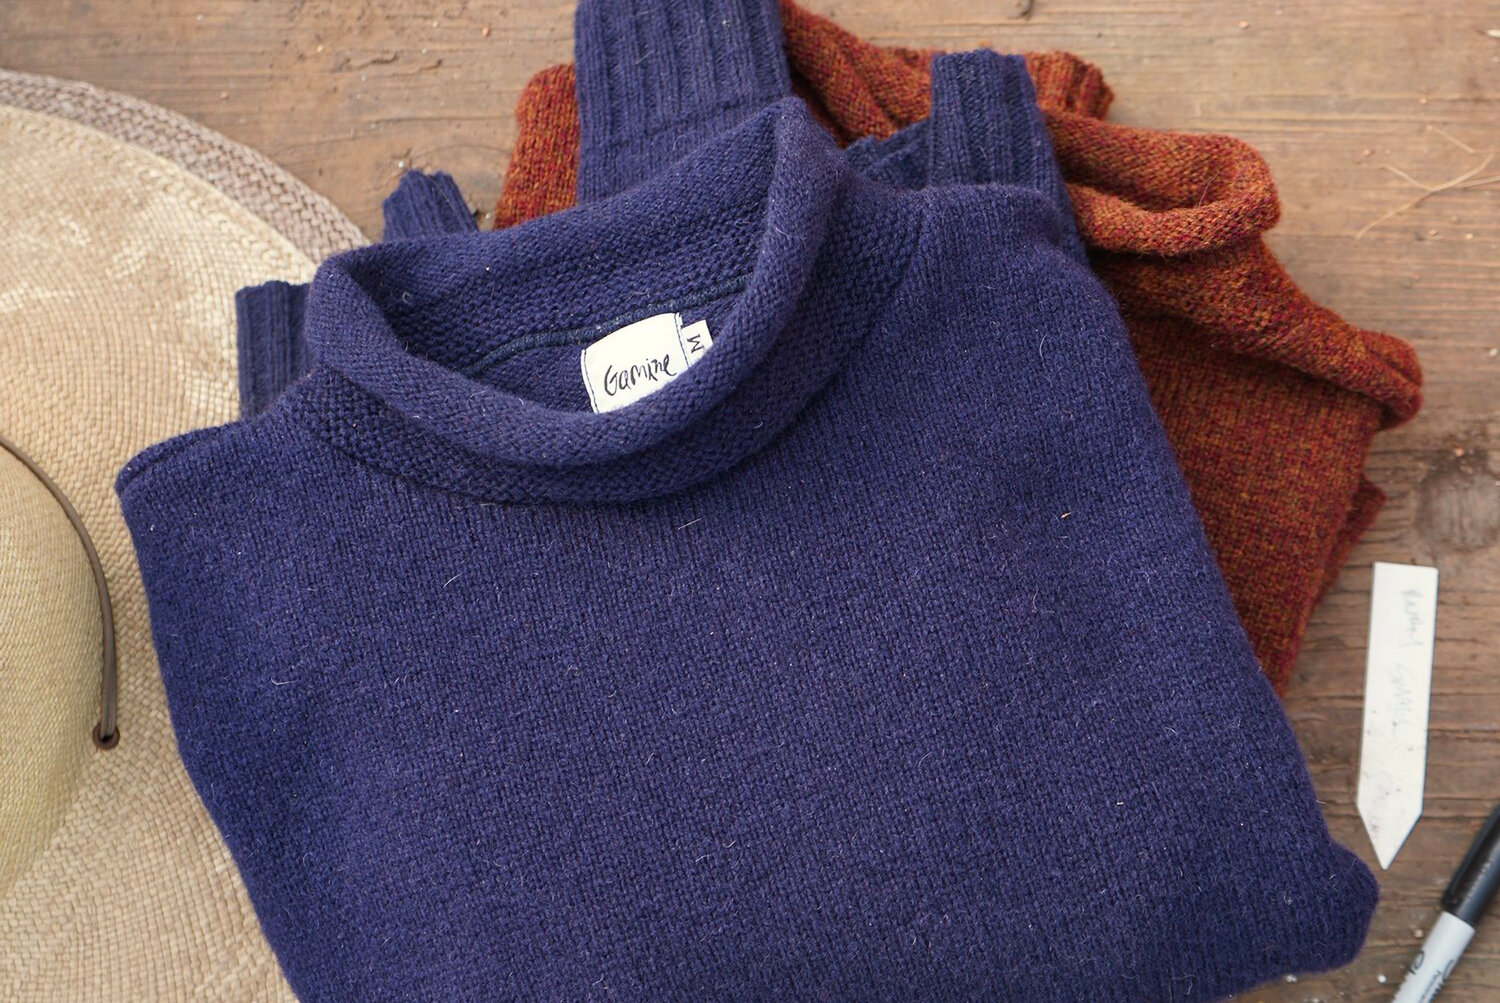 “A responsibly sourced wool sweater, knit in Fall River and 
shot at issima, the small nursery I co-own with Ed Bowen and the sink of all good ideas!” says Johnston